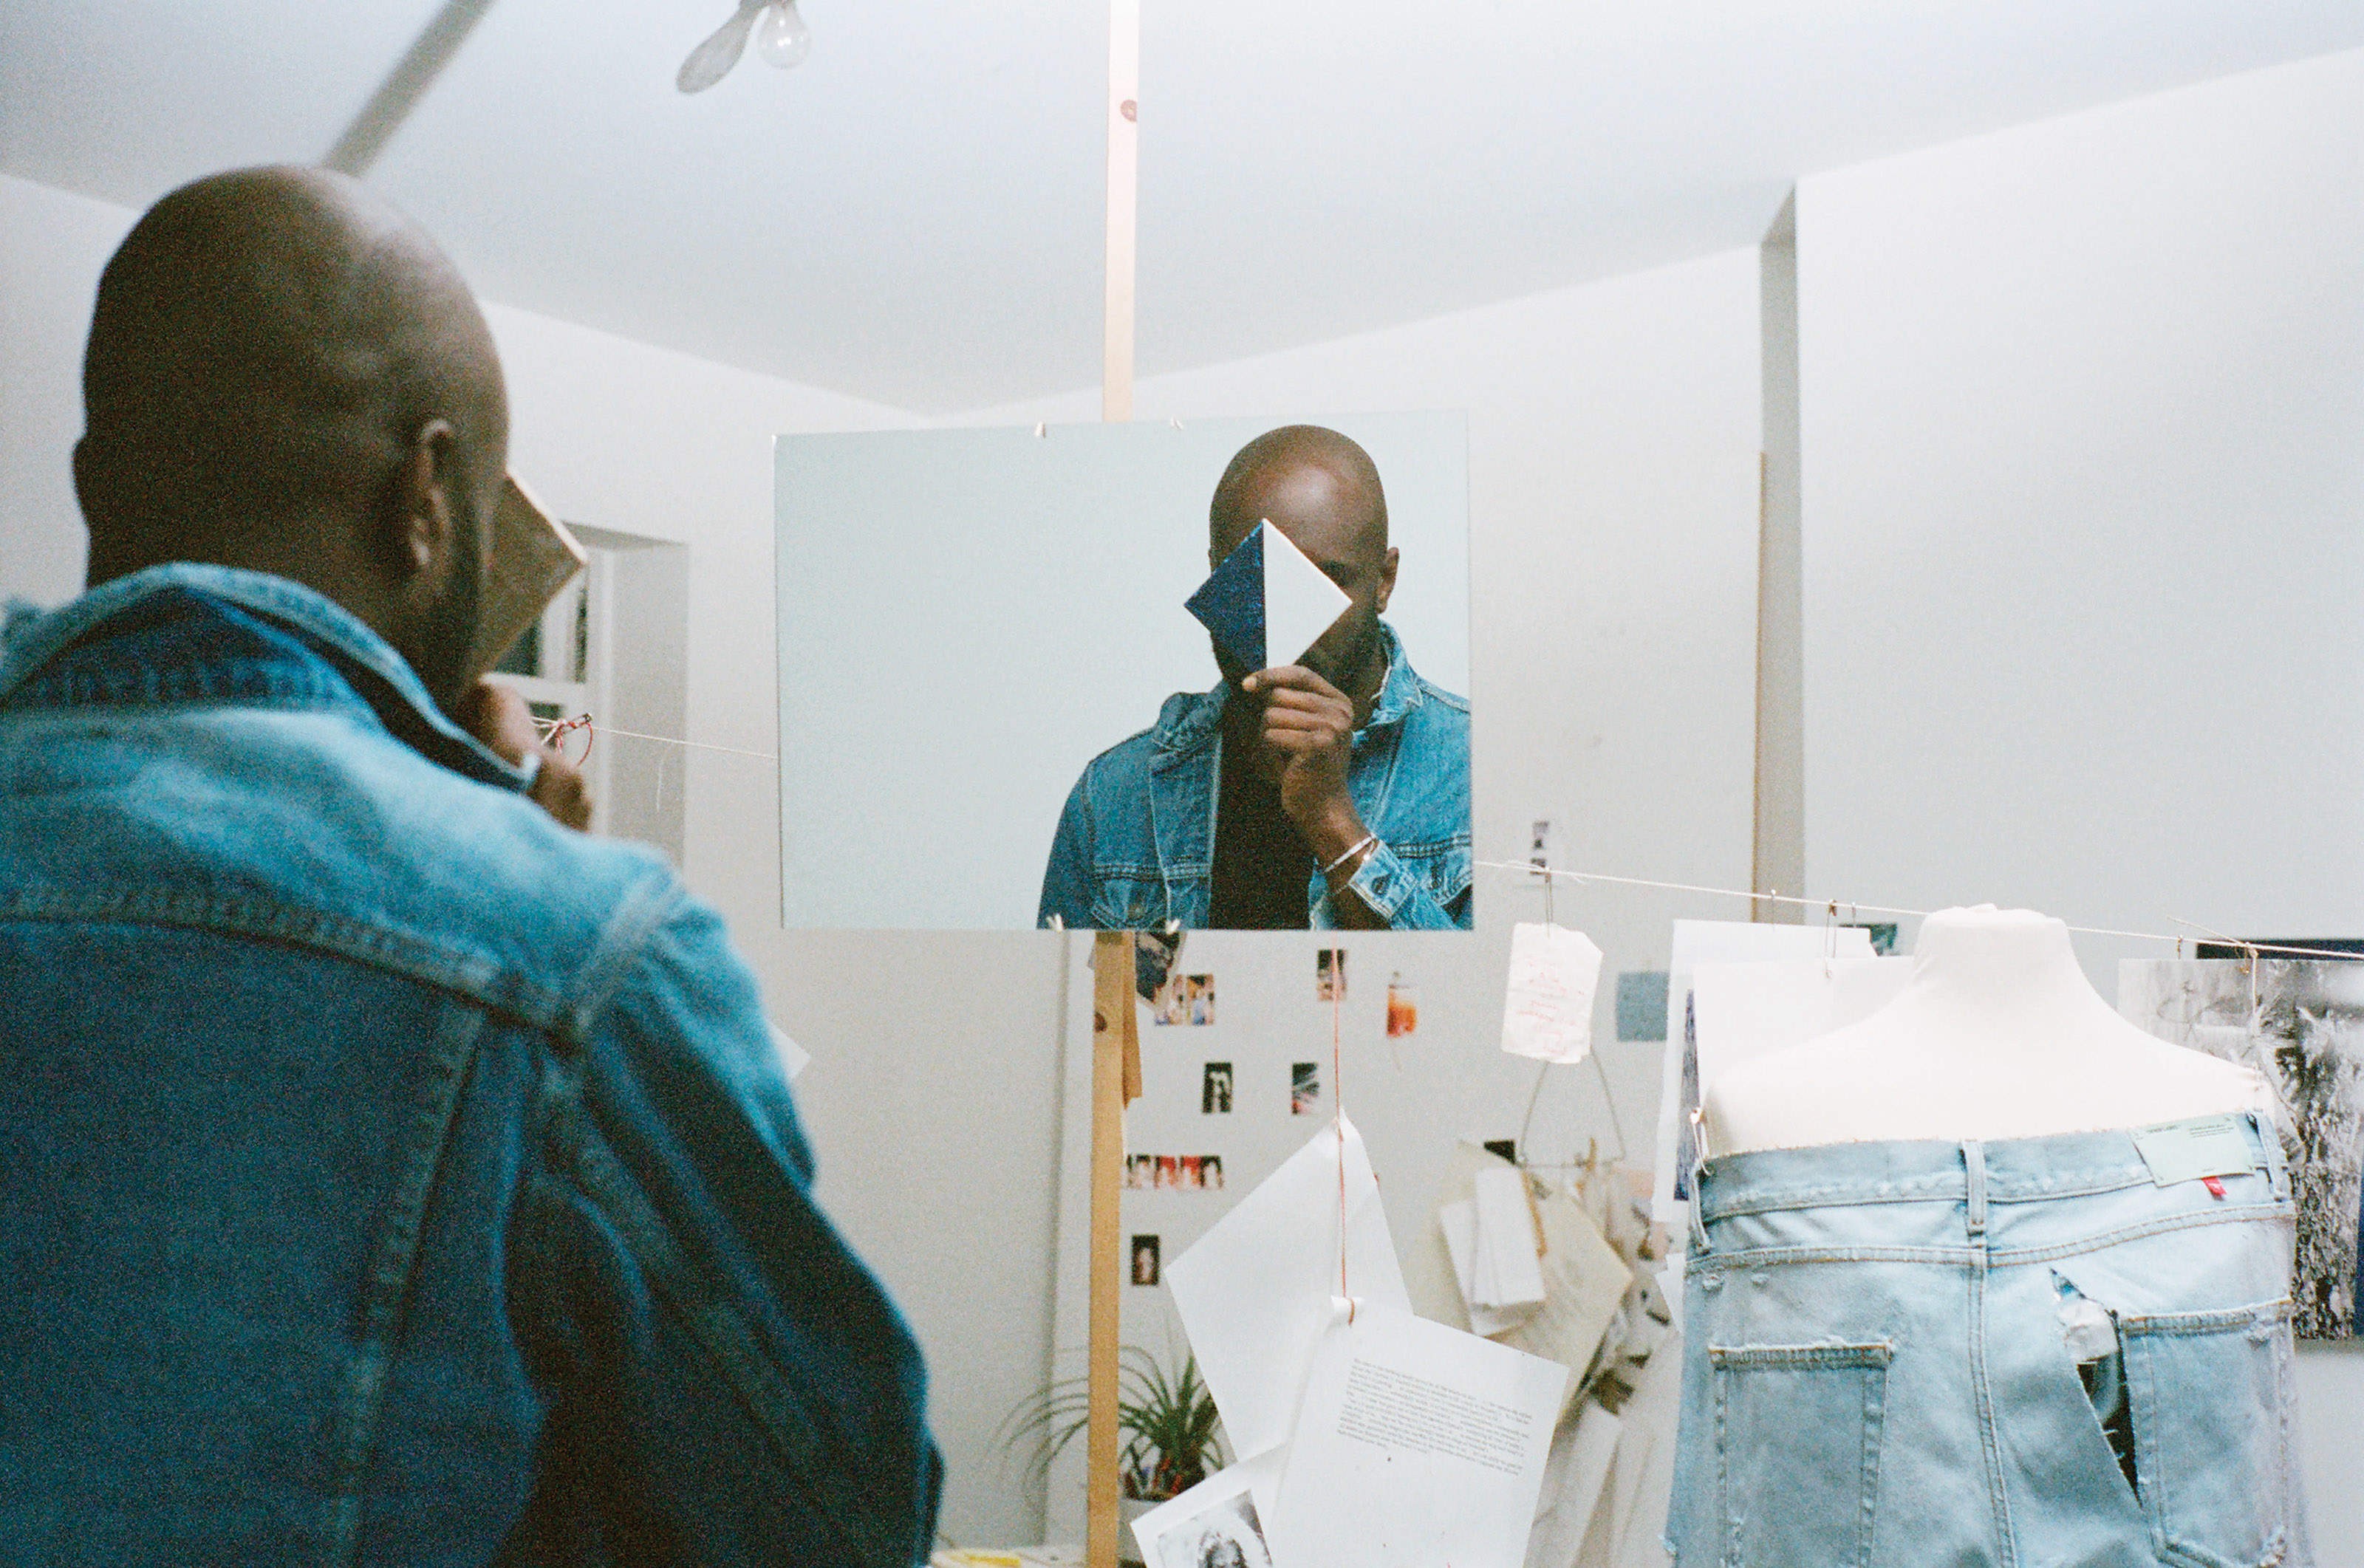 Fashion designer Virgil Abloh, Louis Vuitton’s men’s artistic director, and founder of streetwear brand Off-White, says that in the fashion world he does not like to limit himself to a single way of thinking. Photos: Mark Borthwick/HYPEBEAST